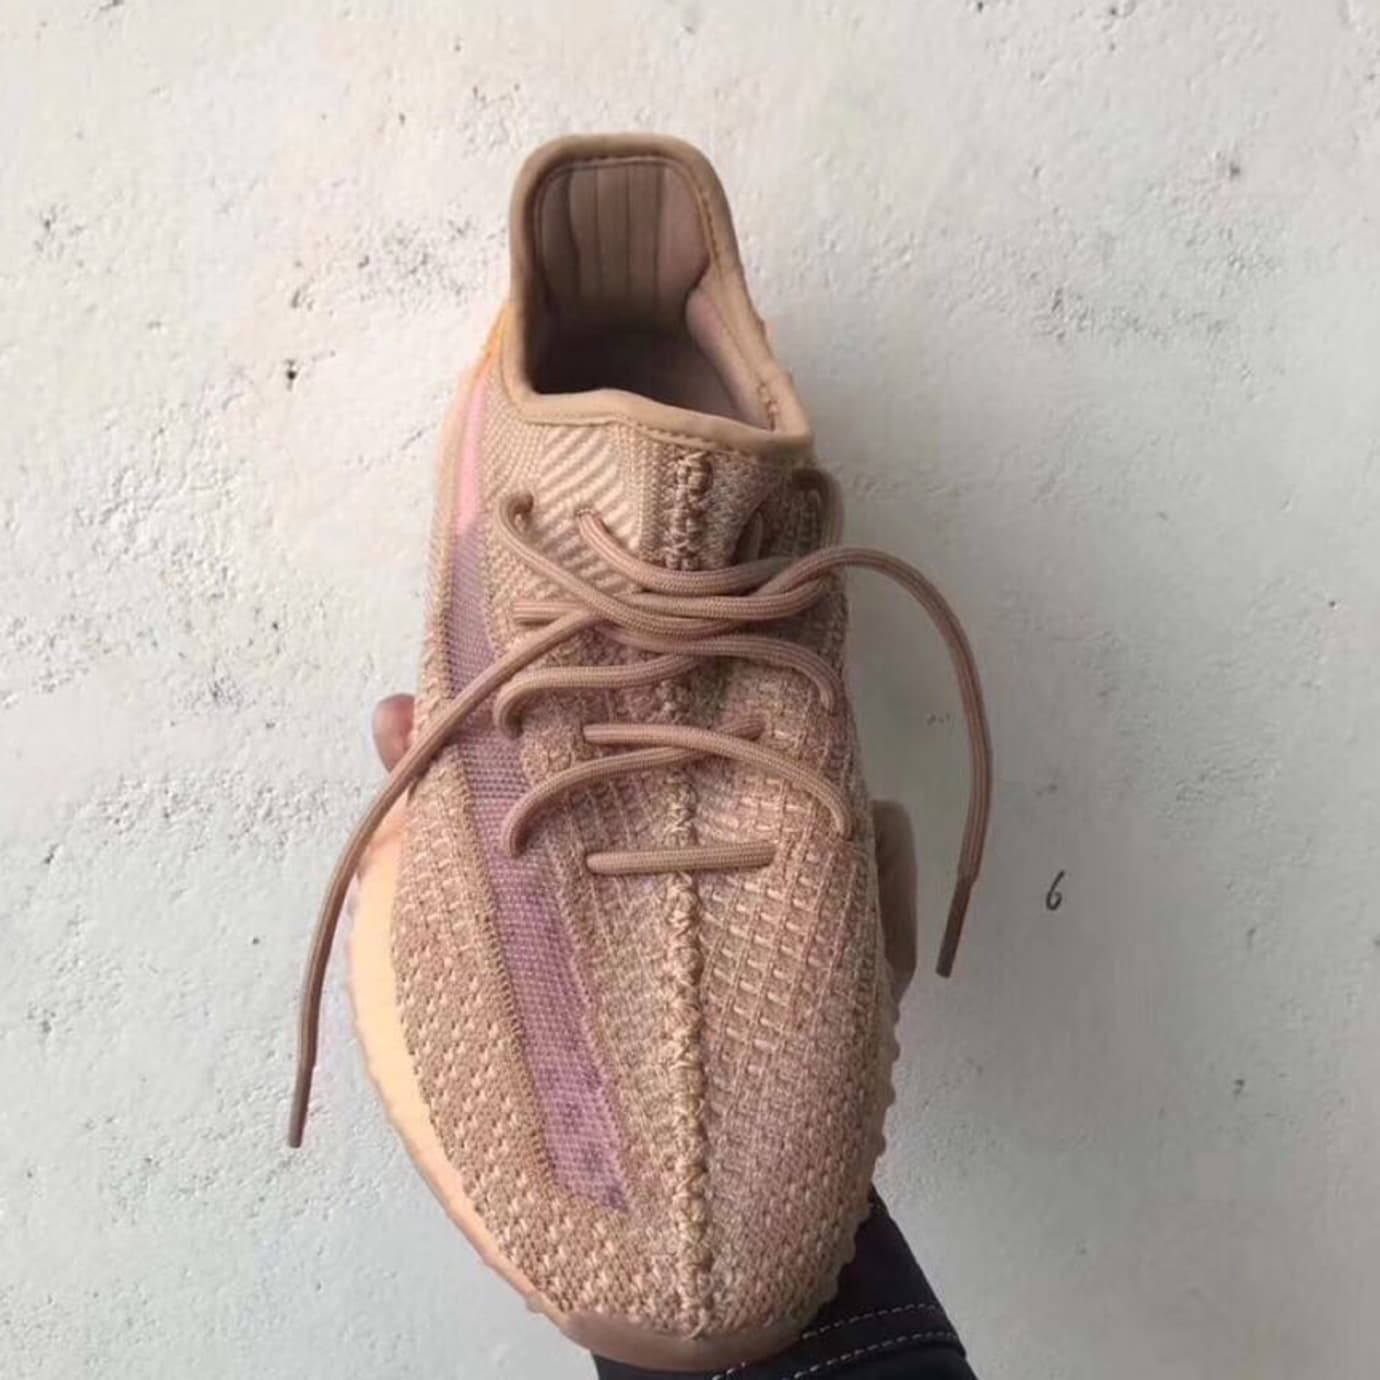 yeezy clay release where to buy